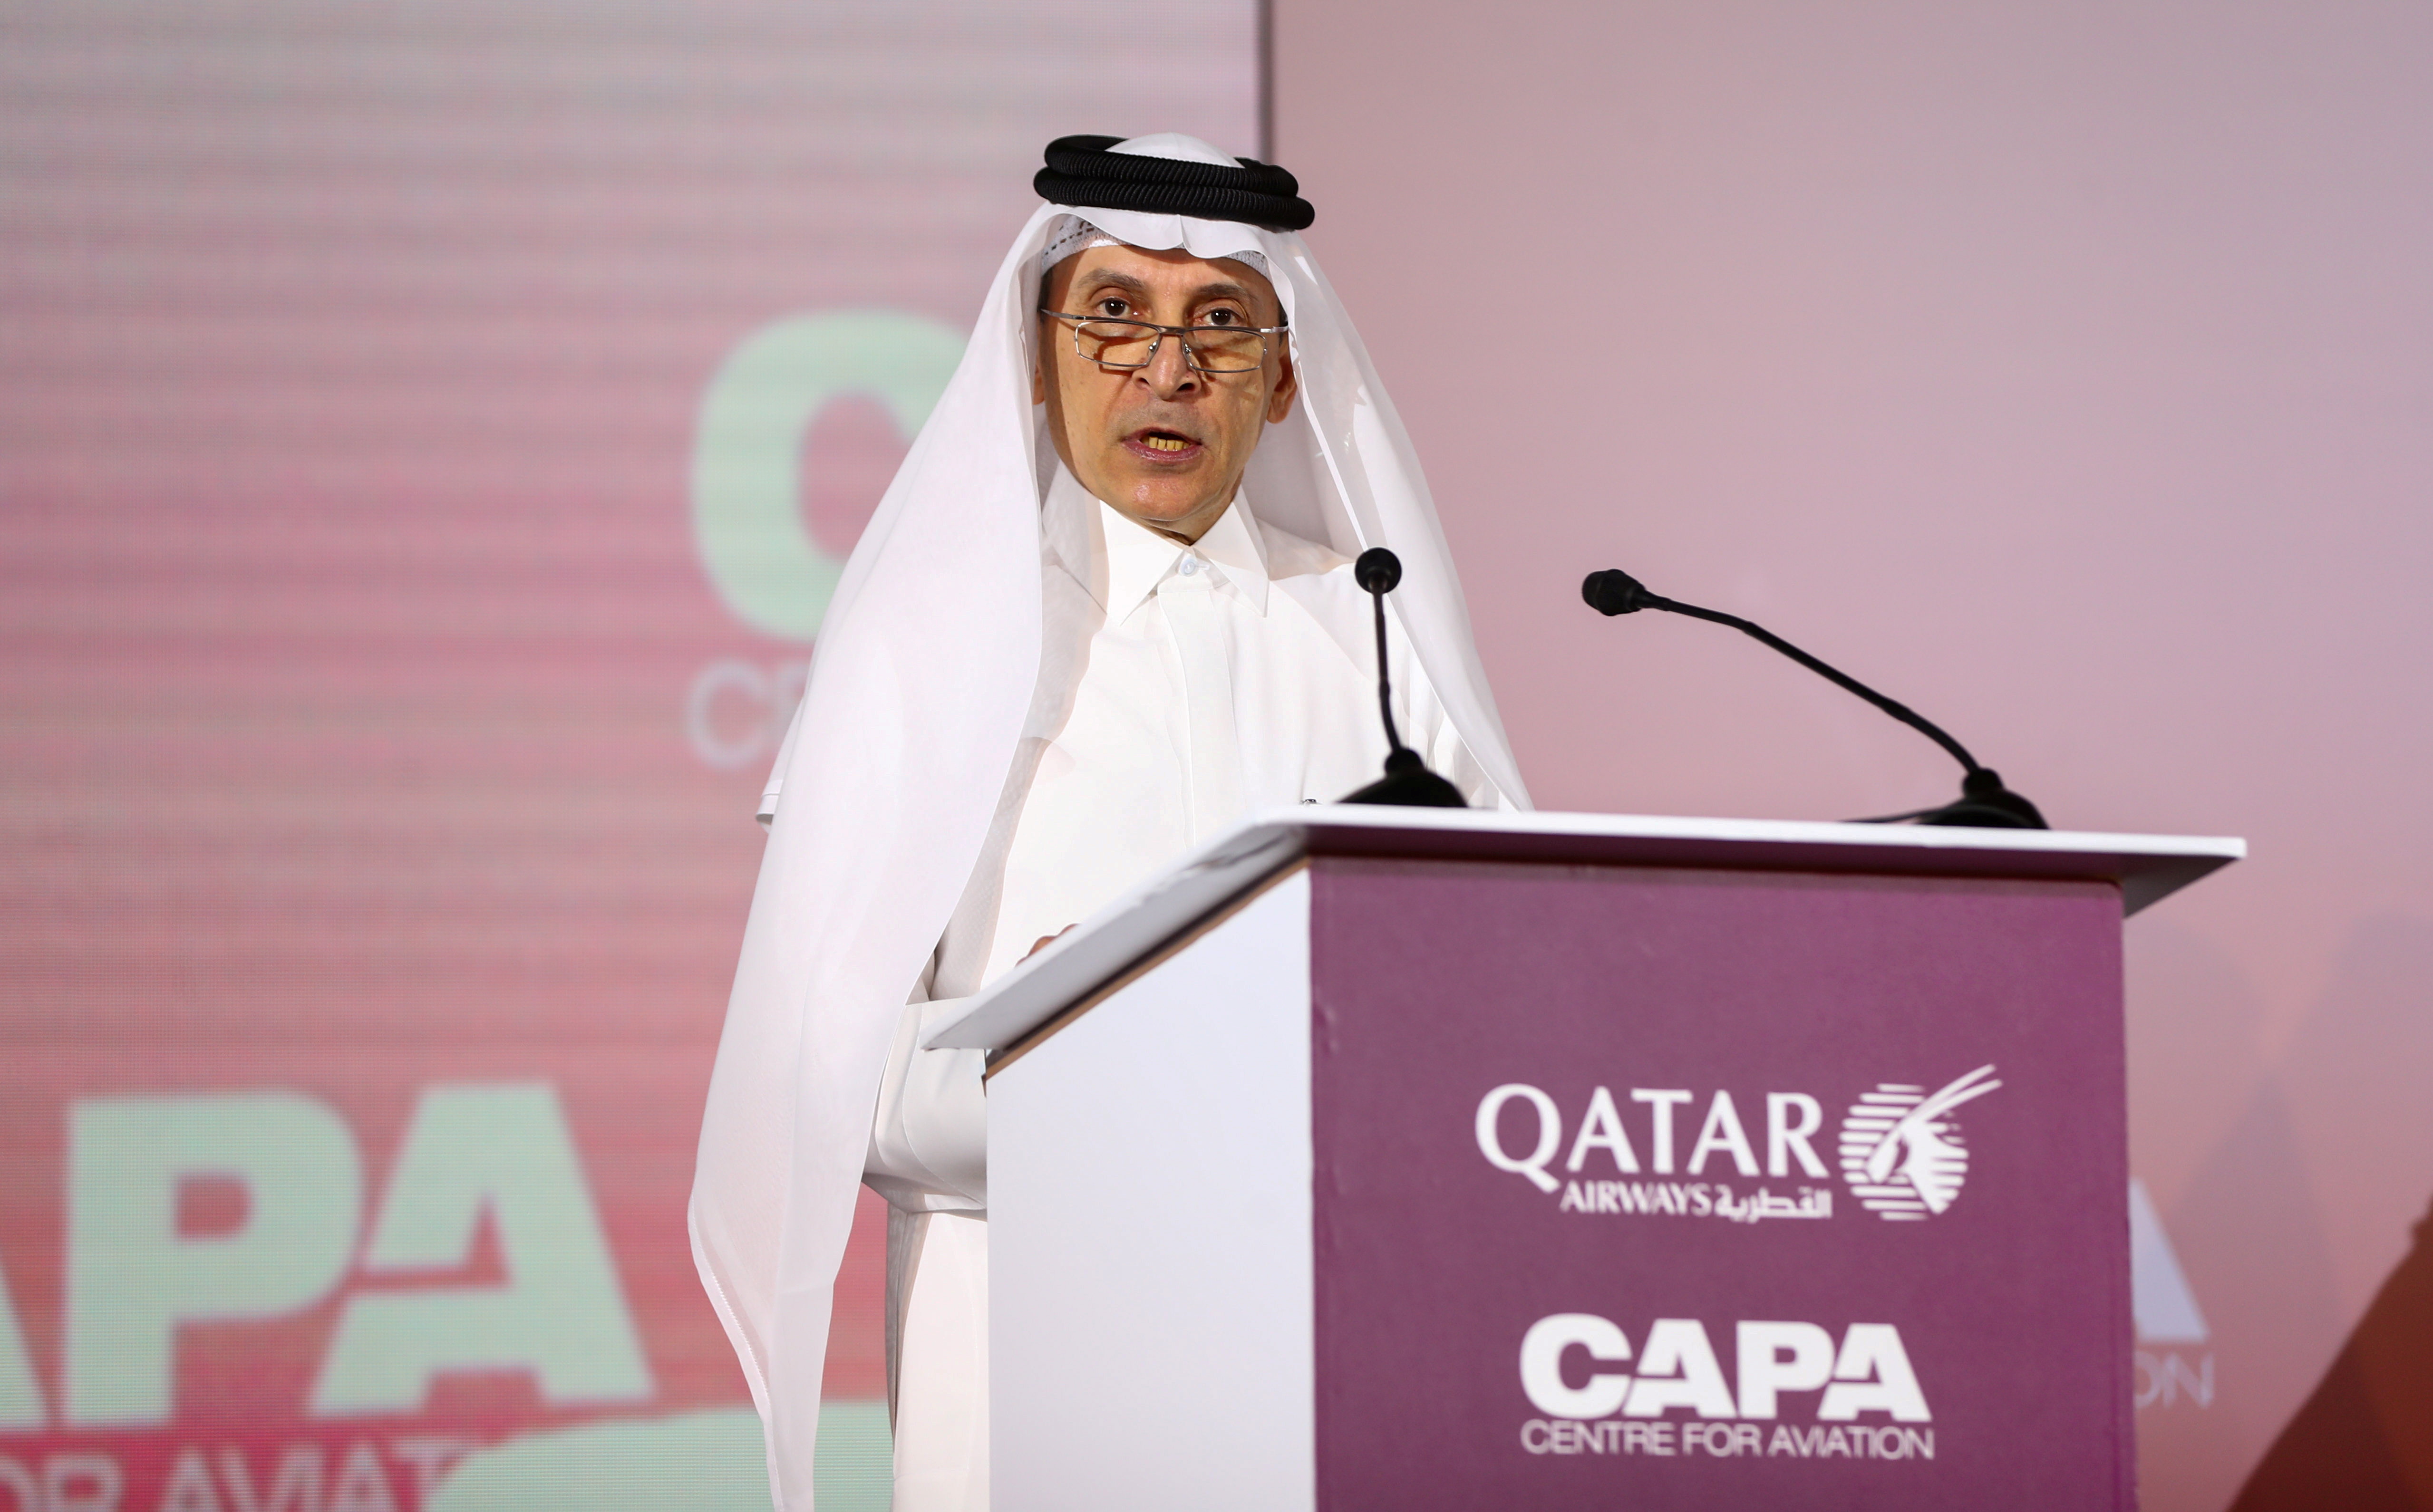 Qatar Airway's Chief Executive Officer, Akbar Al Baker speaks in a welcome speech at Qatar aviation conference, in Doha